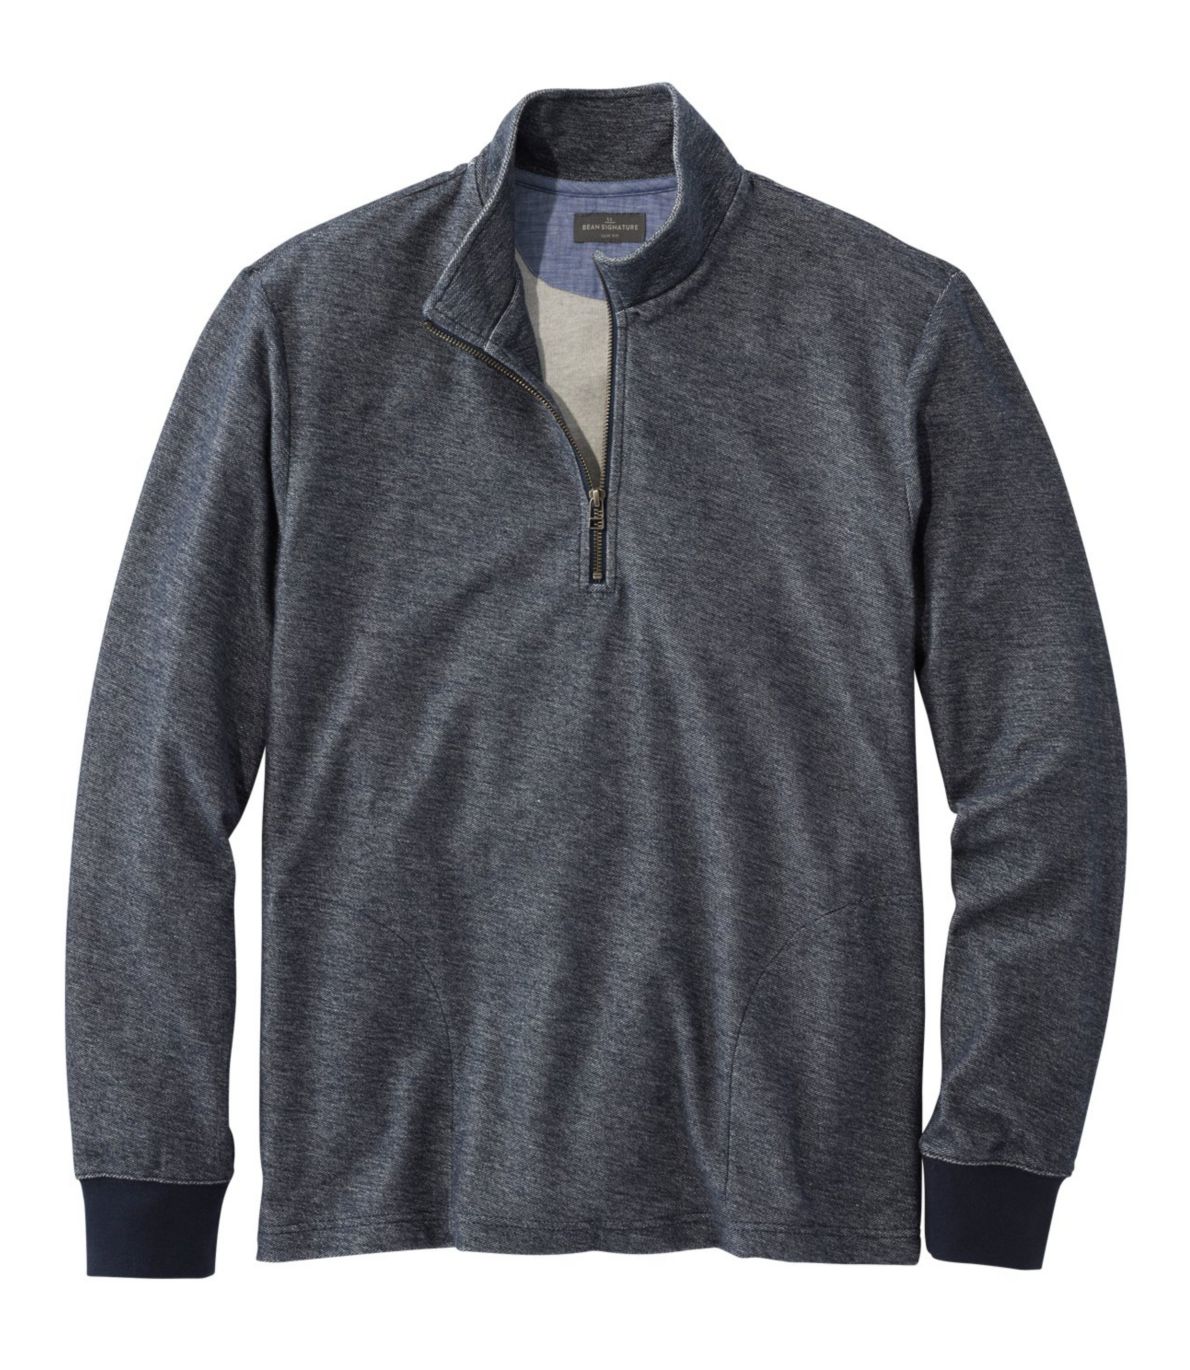 Men's Signature French Terry Pullover, Quarter-Zip, Long Sleeve, Slim Fit